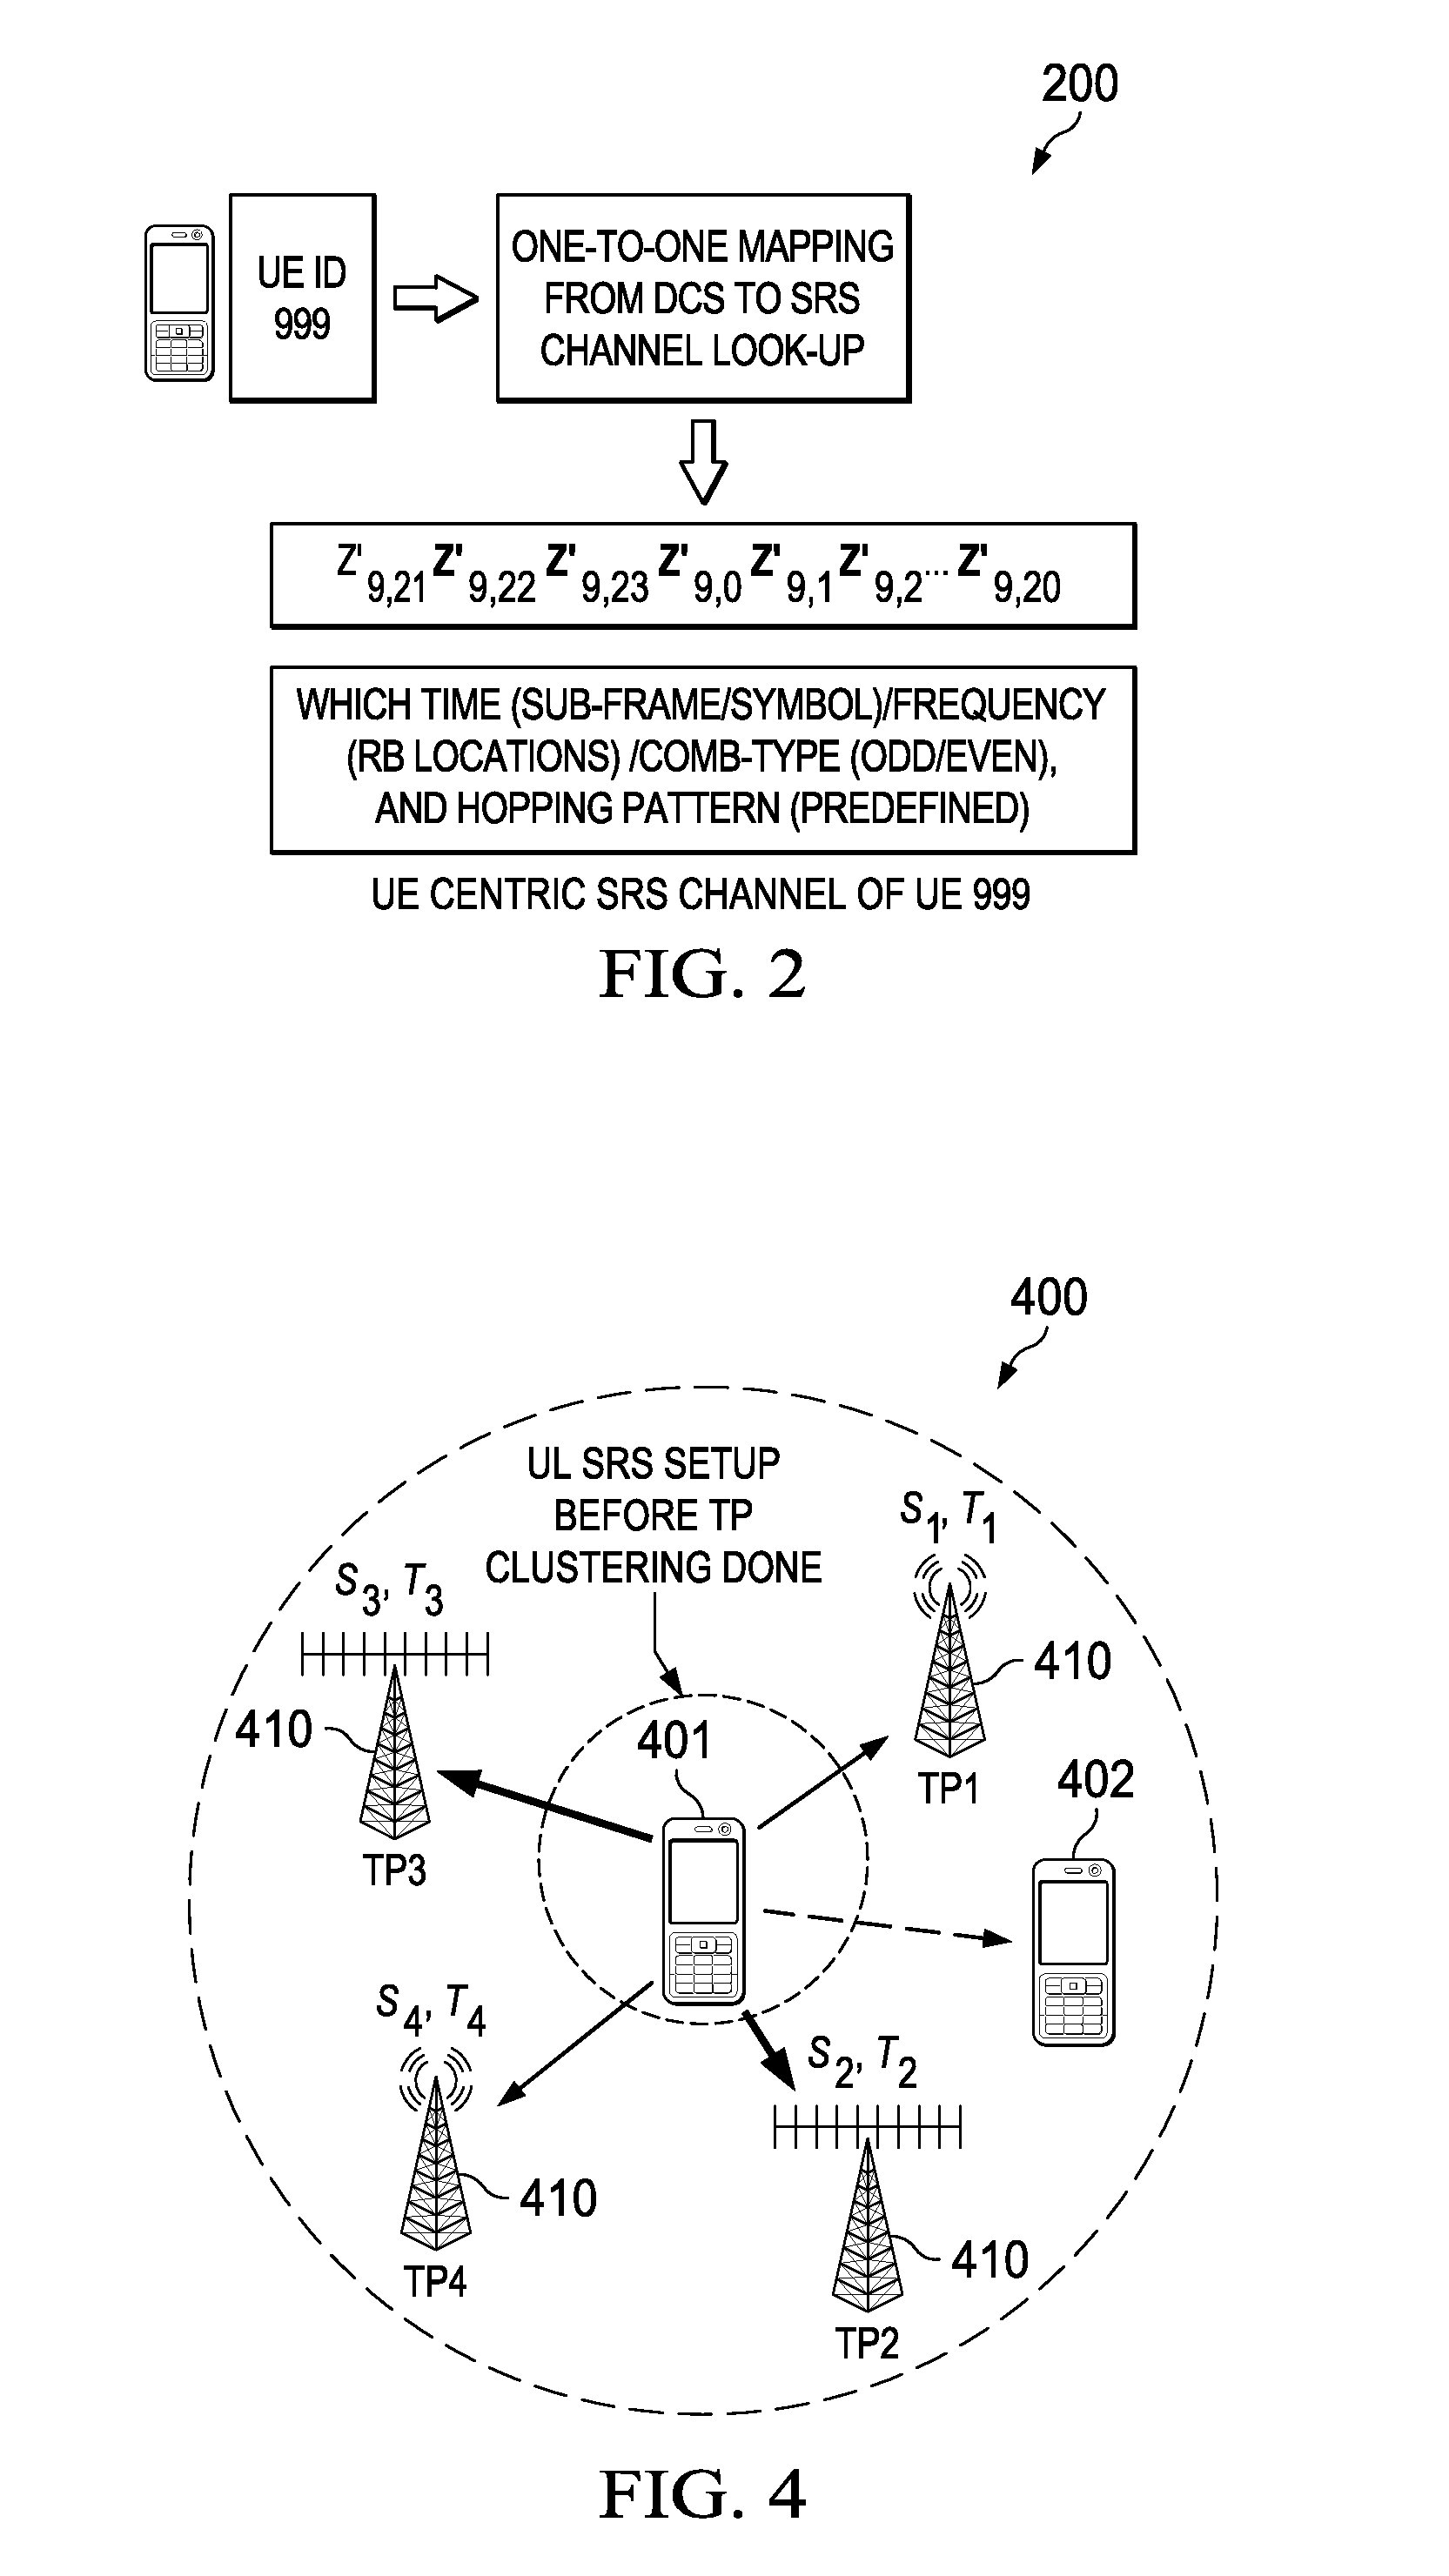 System and Method for Network Uplink Measurement Based Operation Using UE Centric Sounding